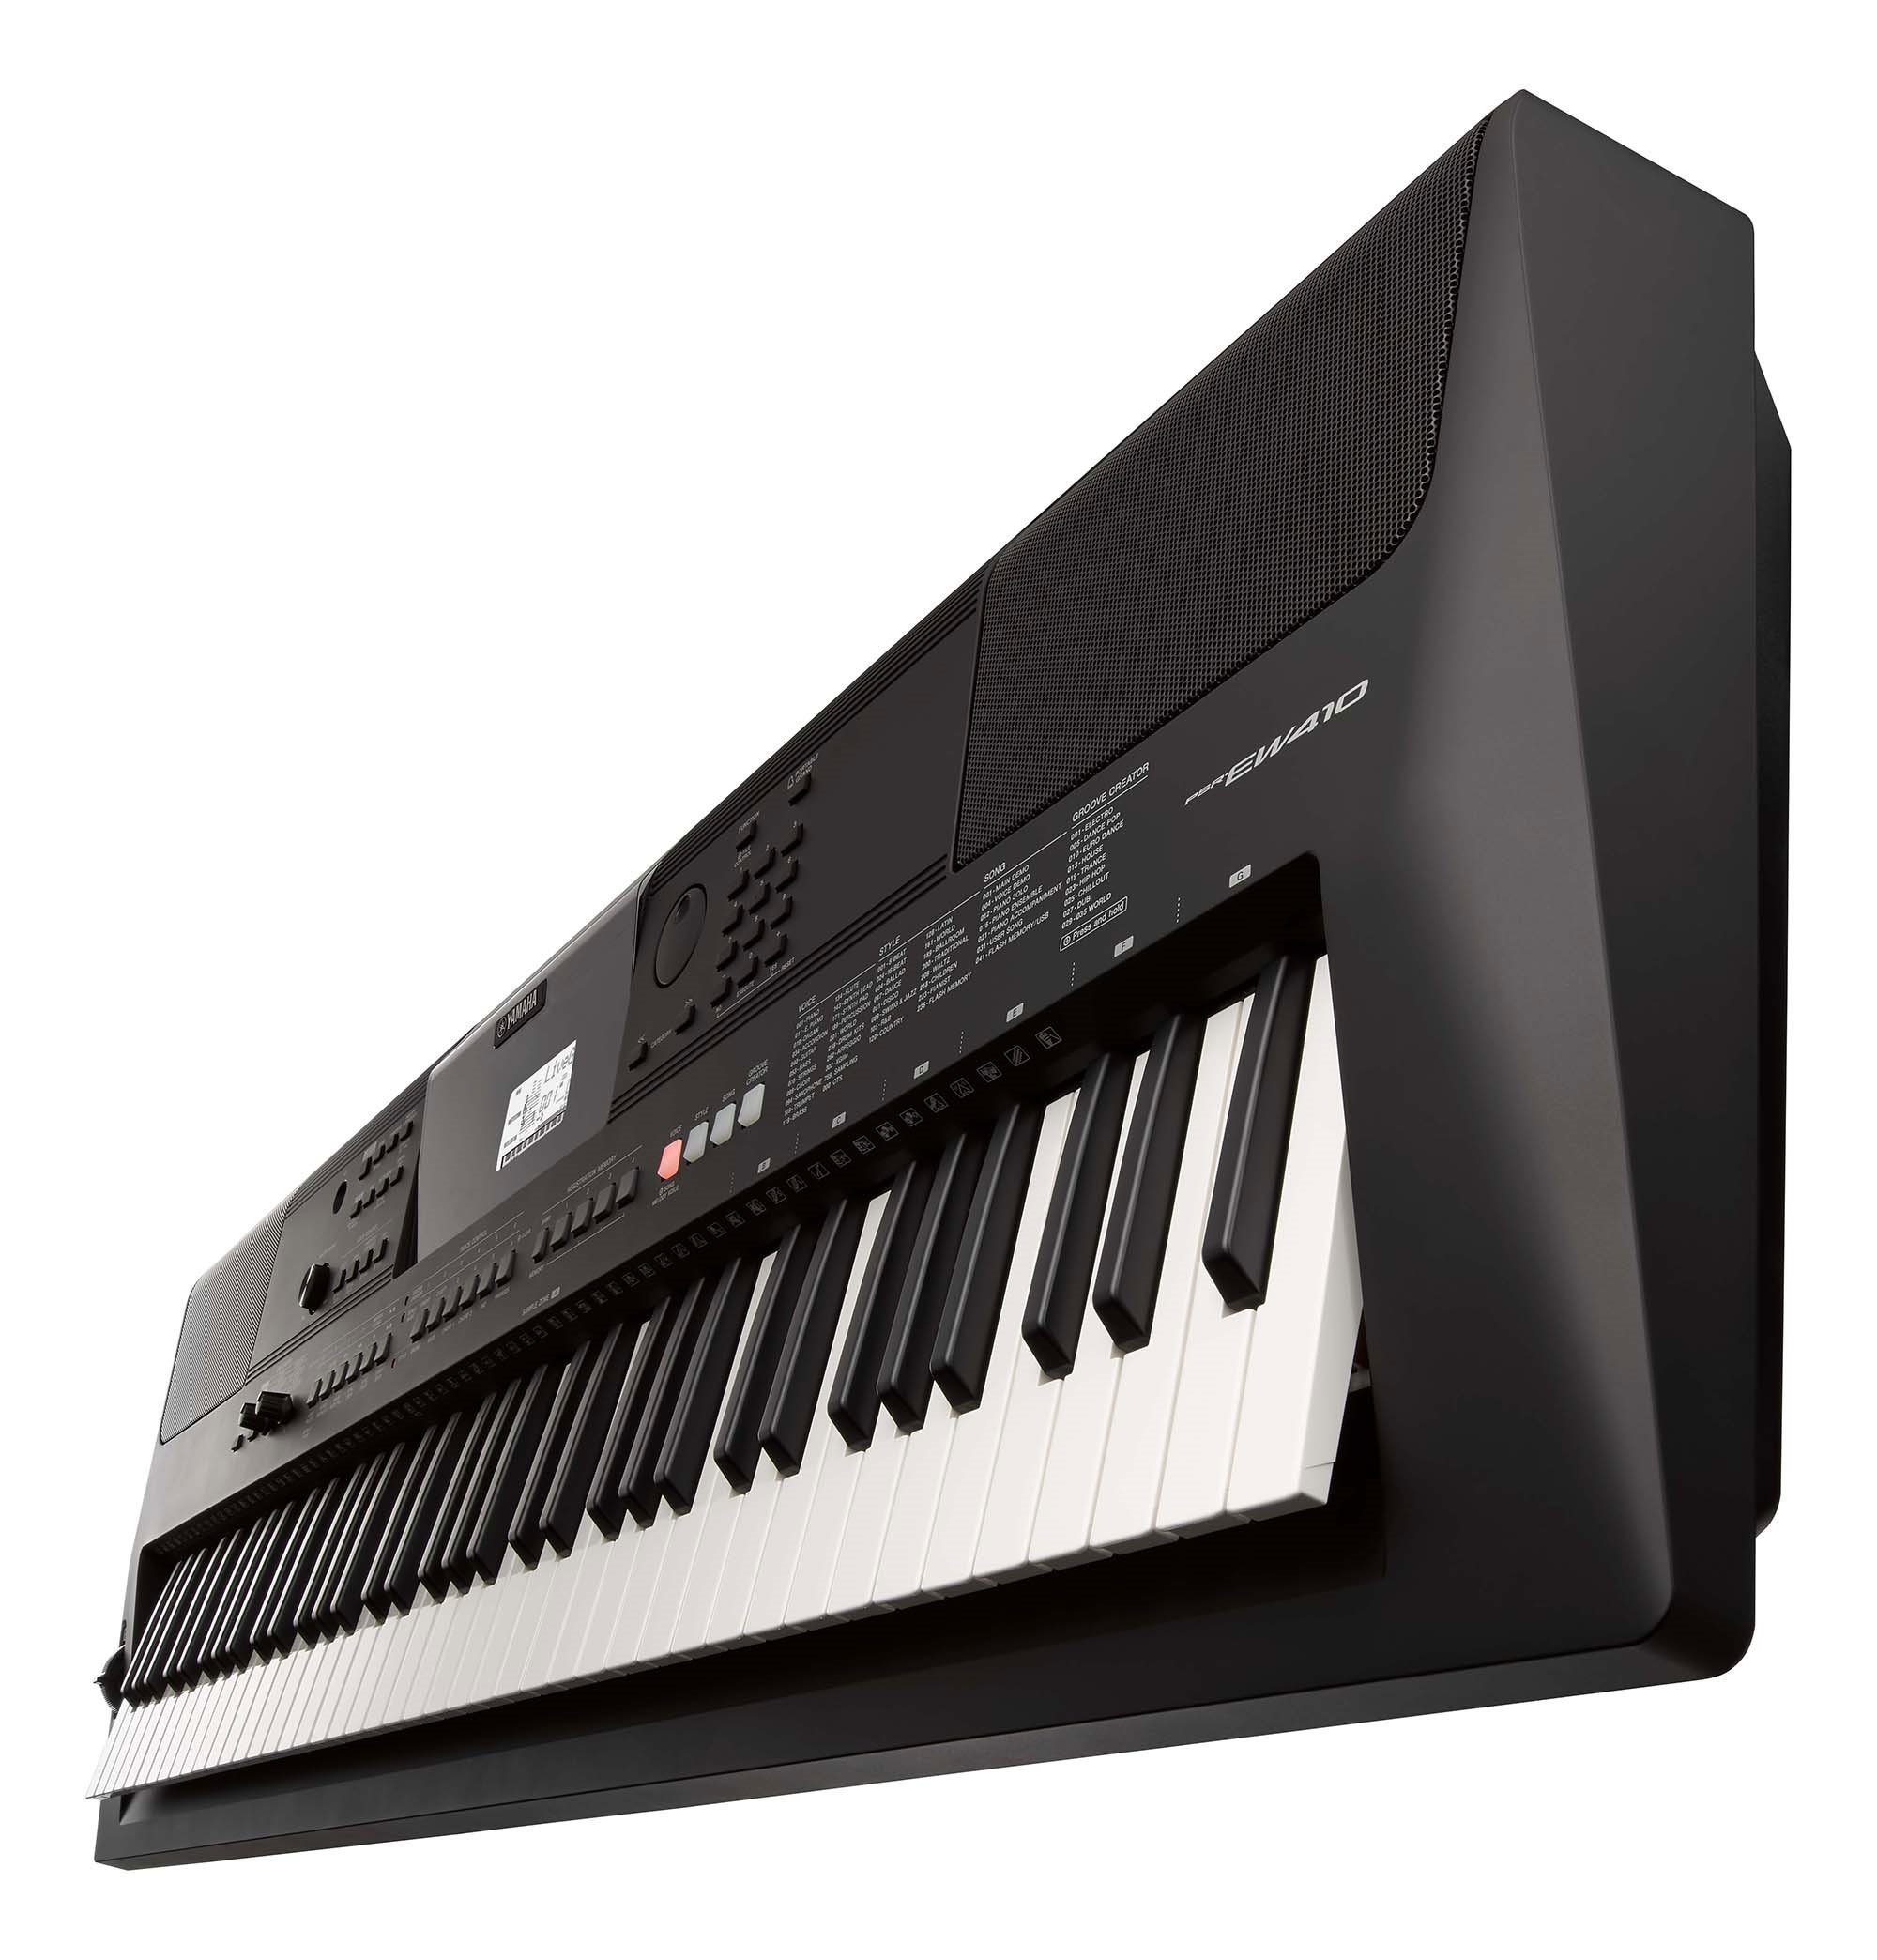 PSR-EW410 - Overview - Portable Keyboards - Keyboard Instruments - Musical  Instruments - Products - Yamaha USA